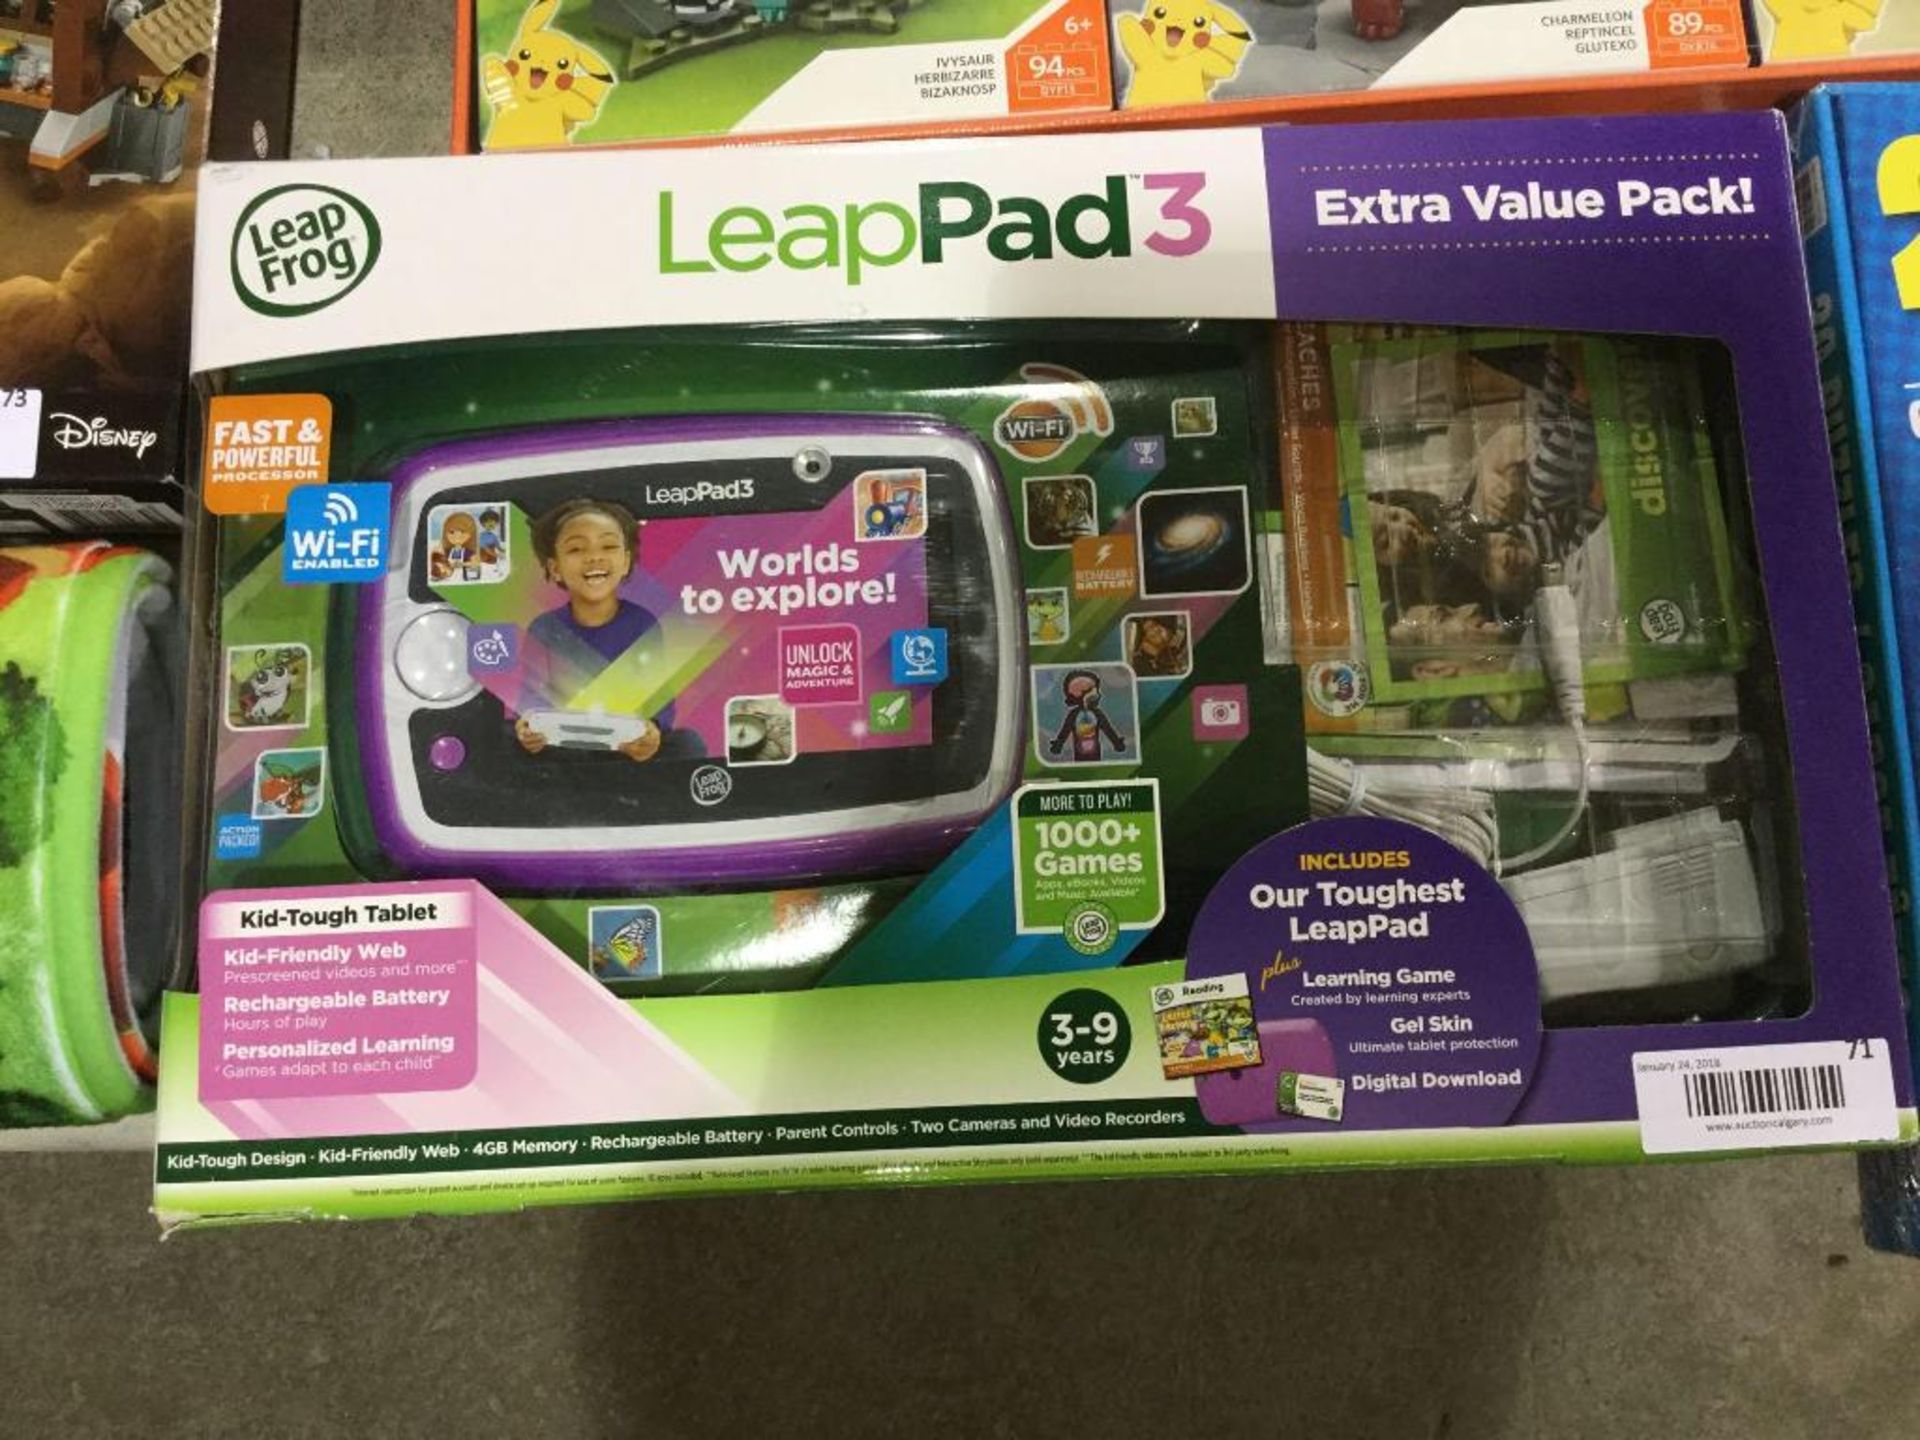 LeapPad 3 Extra Value Pack - New